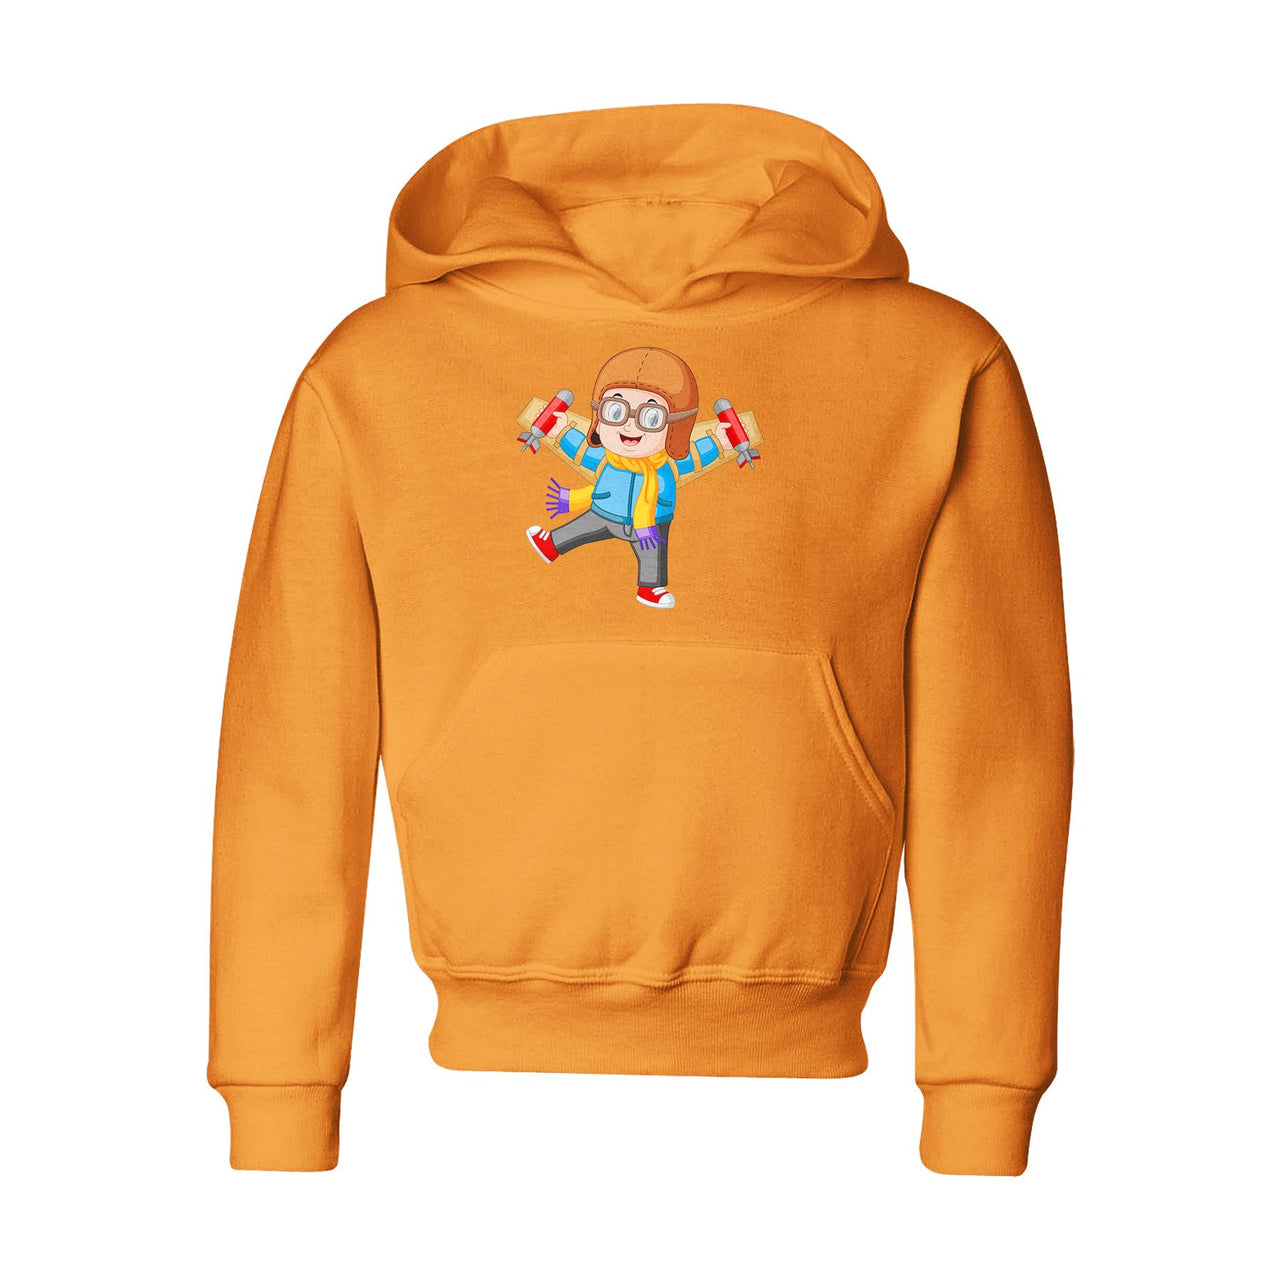 Cute Little Boy Pilot Costume Playing With Wings Designed "CHILDREN" Hoodies